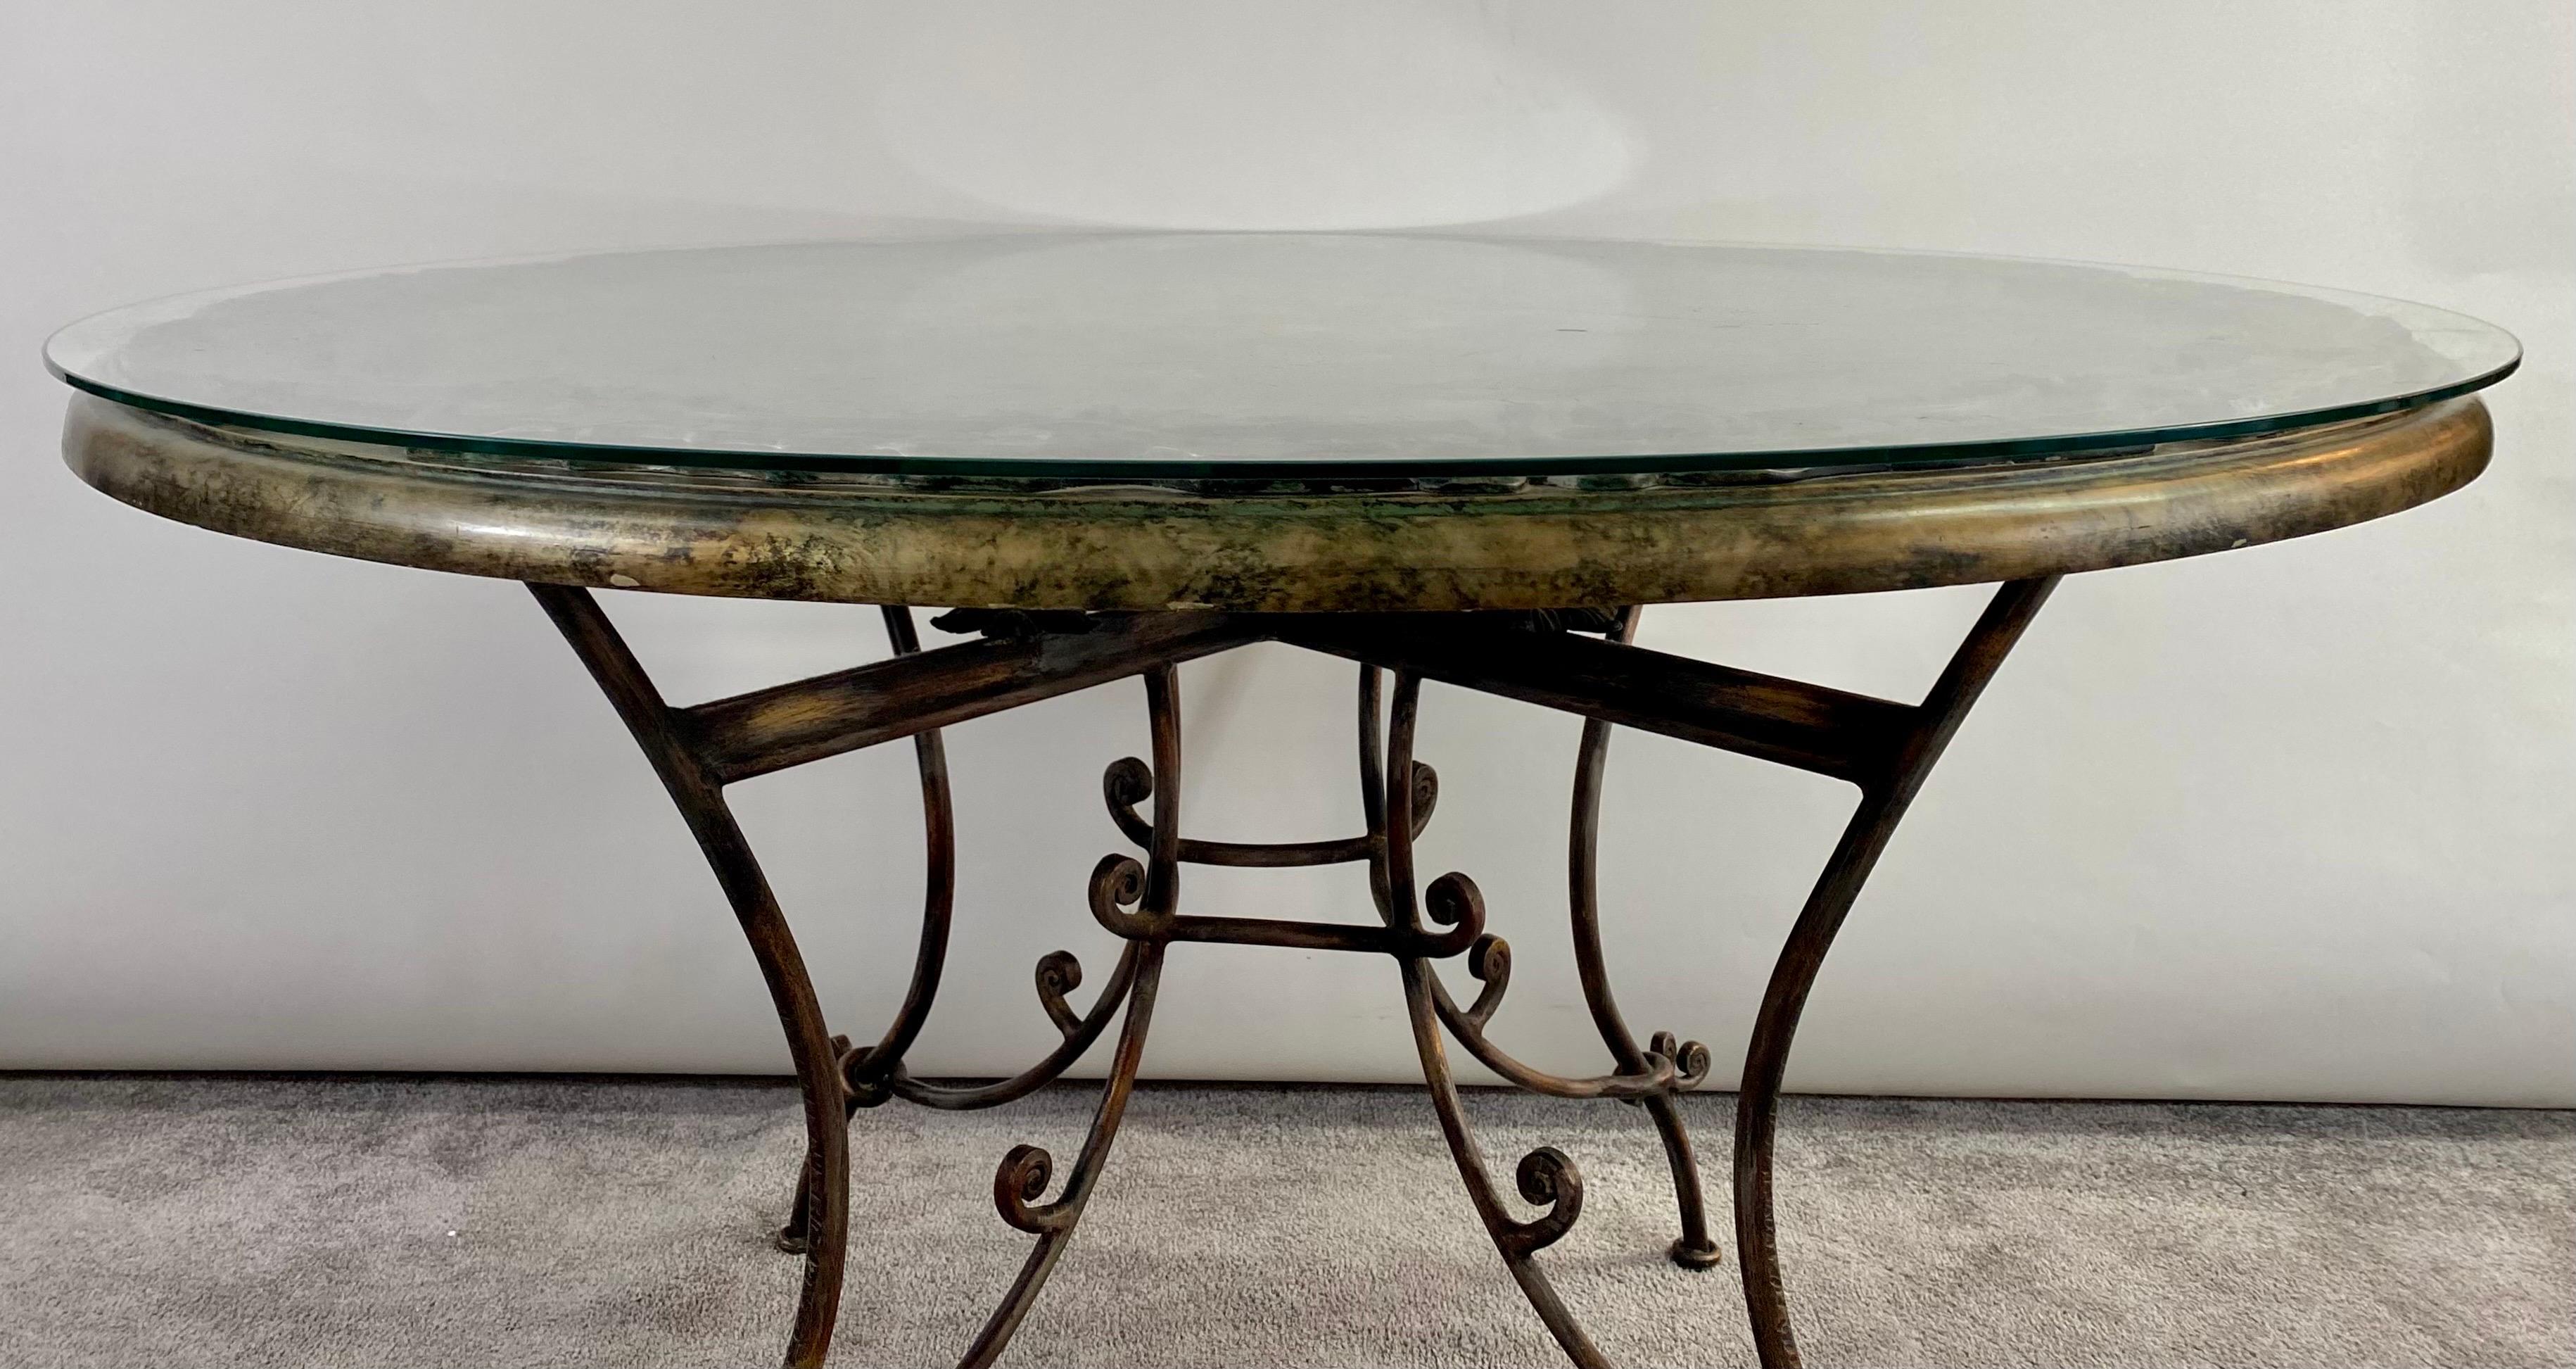 An exquisite French Neoclassical style round center table or dining table in the style of Rene Drouet (French, 1899). The beautiful table top is hand painted featuring floral design and a large flower bouquet on an antiqued tone surface in brown ,